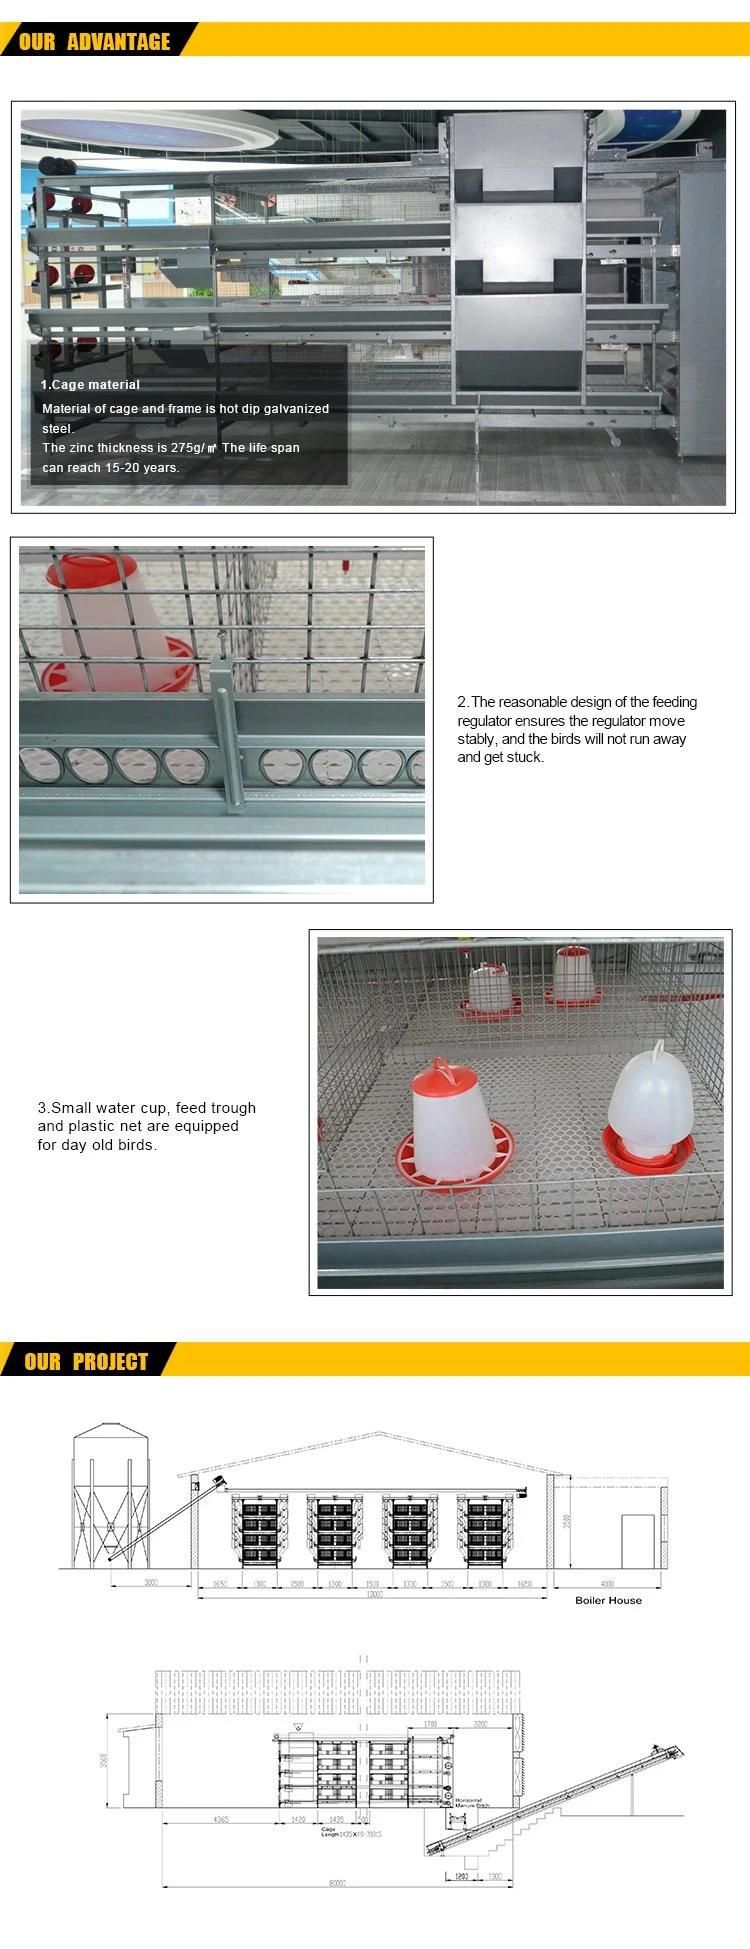 Good Price Pullet Raising Equipment with Battery Cages